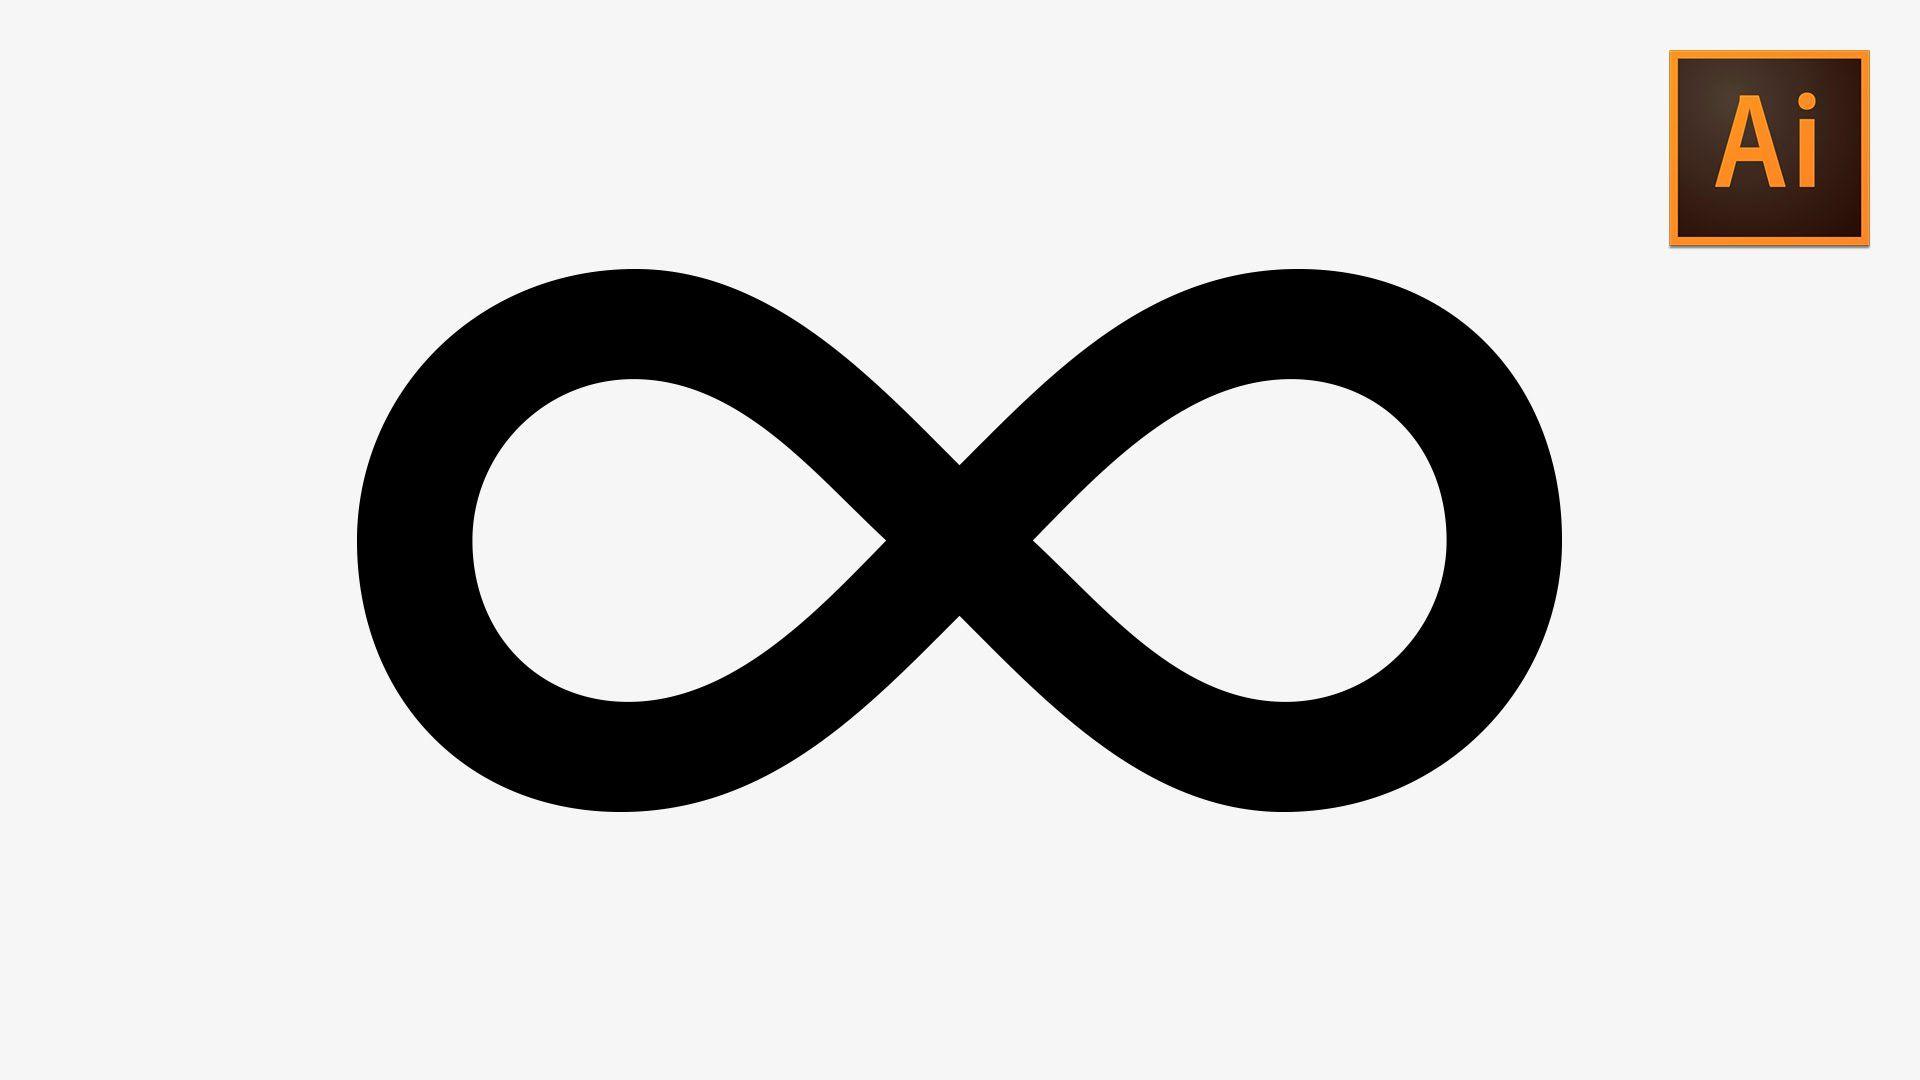 Youtube.com Logo - Learn How to Quickly Create an Infinity Symbol in Adobe Illustrator ...